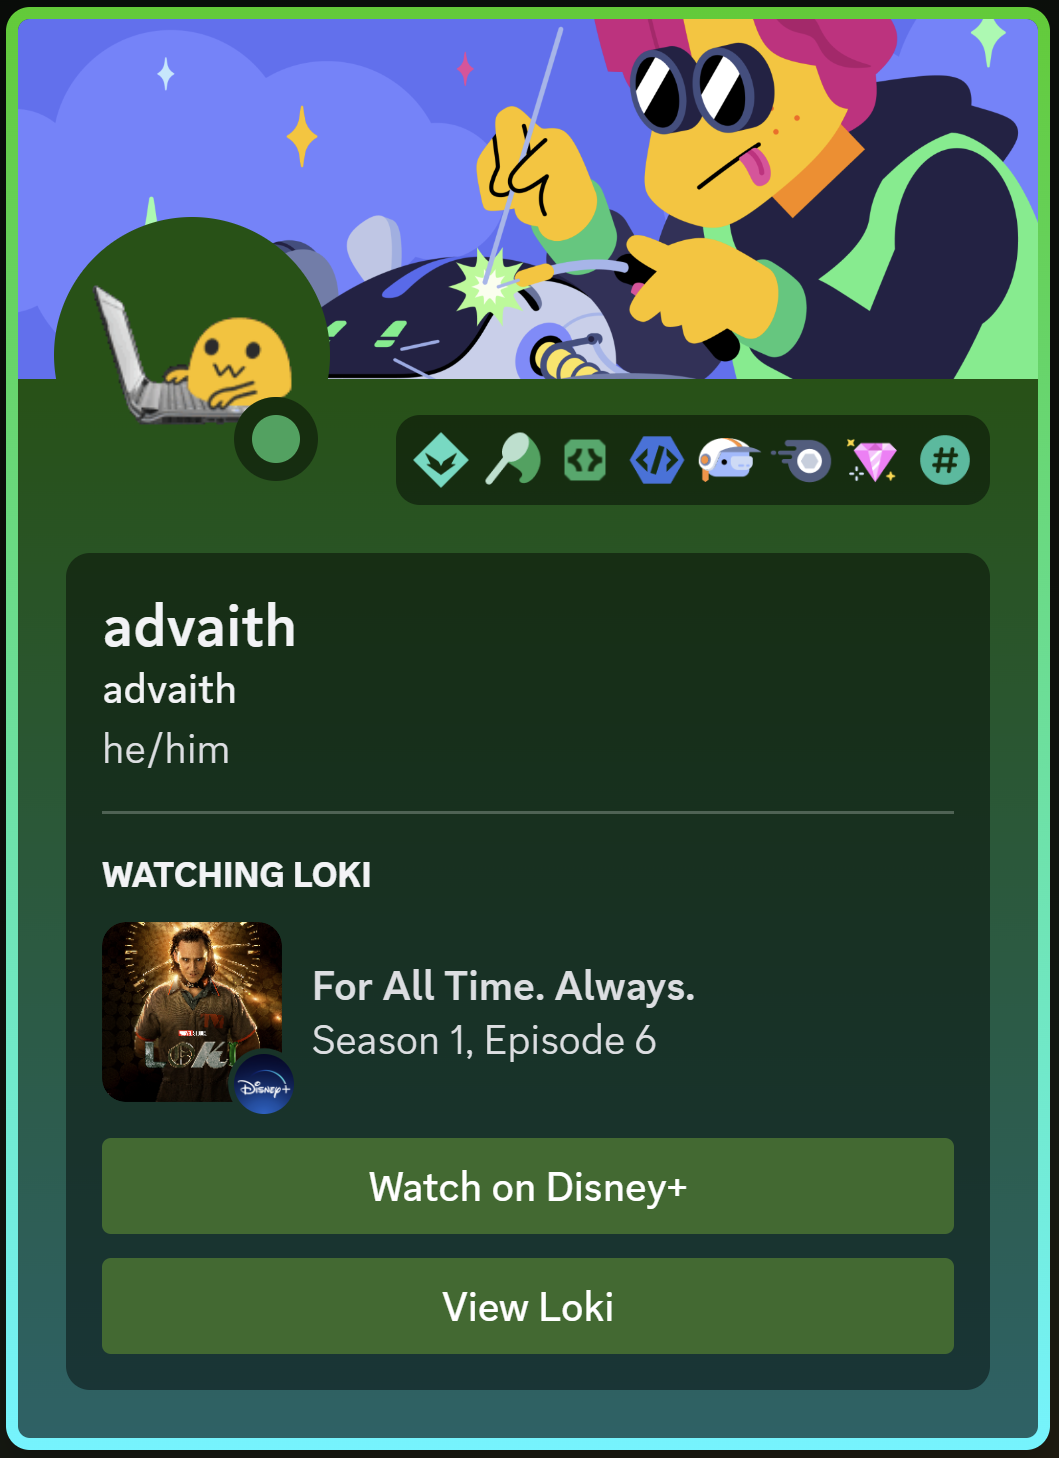 advaith's Discord profile with a Watching Loki rich presence for Season 1 Episode 6: For All Time. Always.